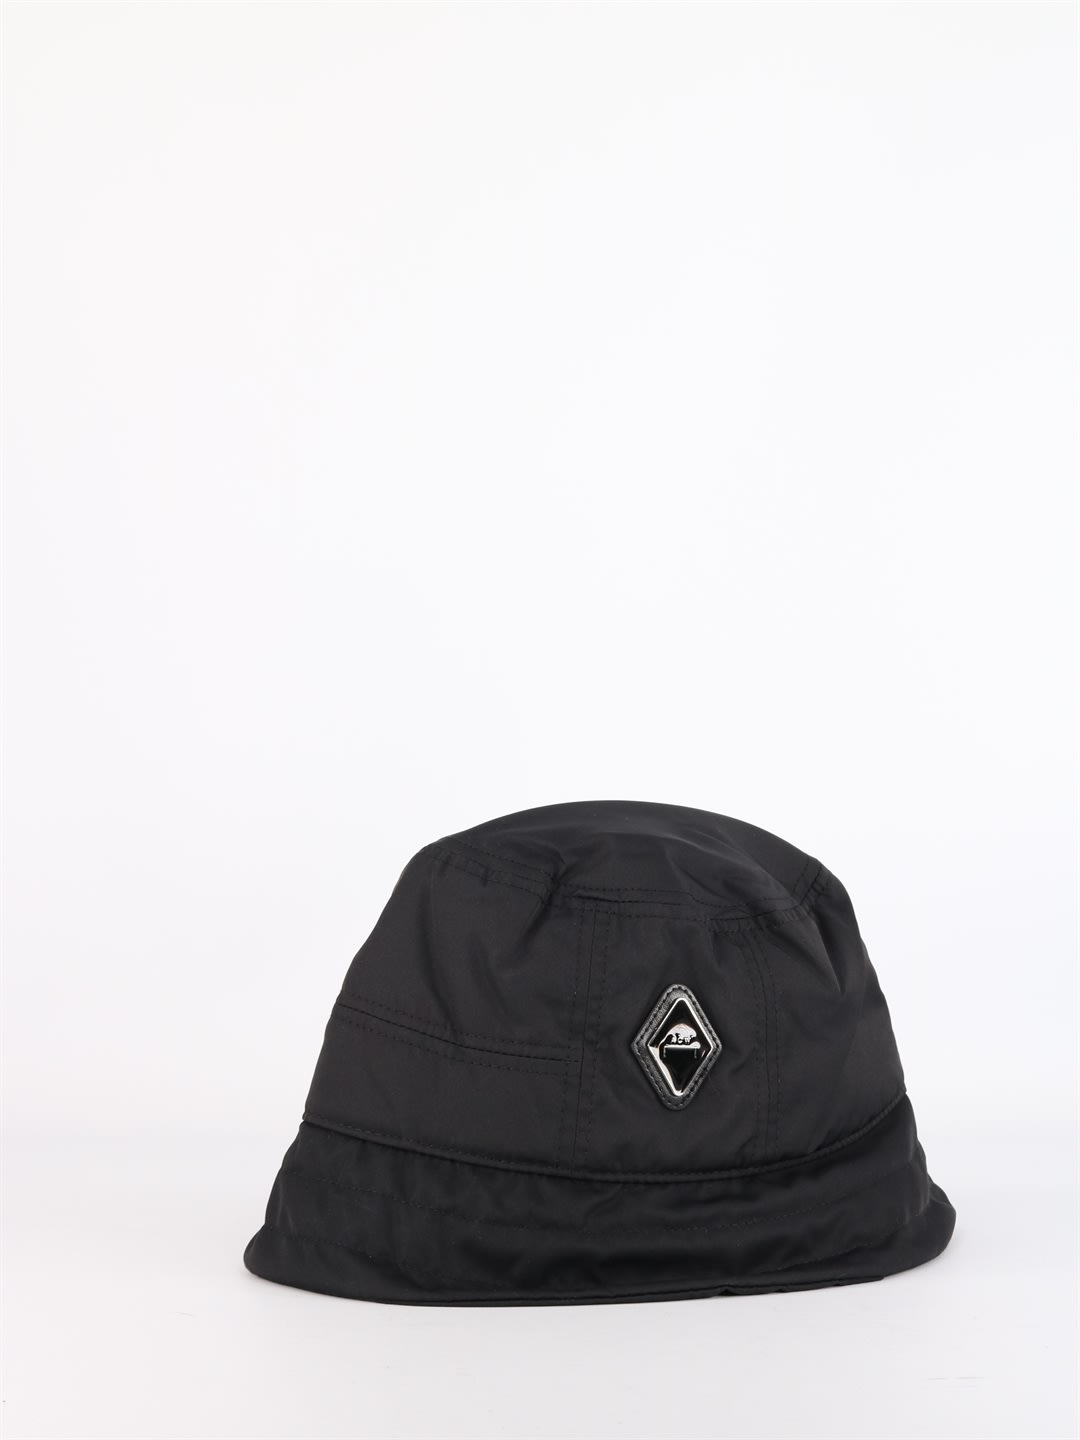 A-COLD-WALL Black Bucket Hat